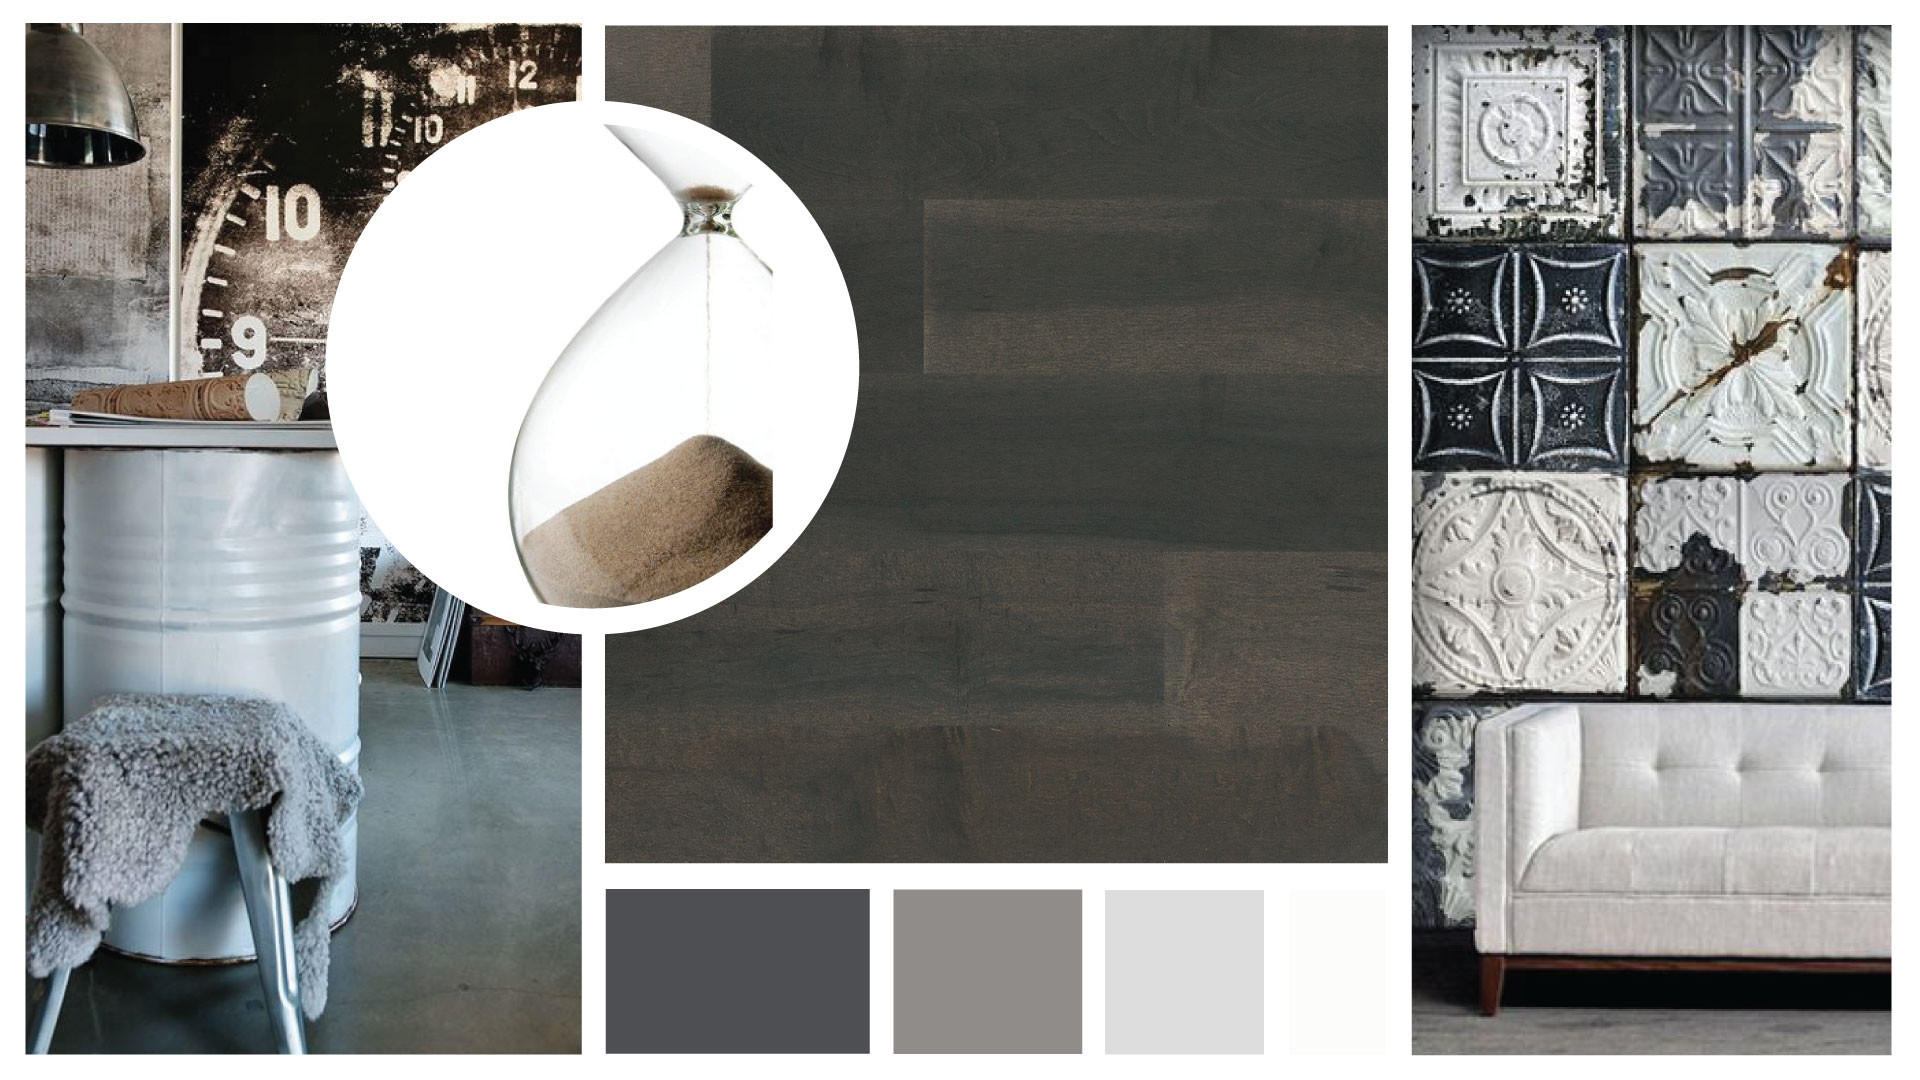 17 Unique Grey Hardwood Floors Houzz 2024 free download grey hardwood floors houzz of 4 latest hardwood flooring trends lauzon flooring within organik floors have integrity their natural look and feel convey a sense of origin substance and histor